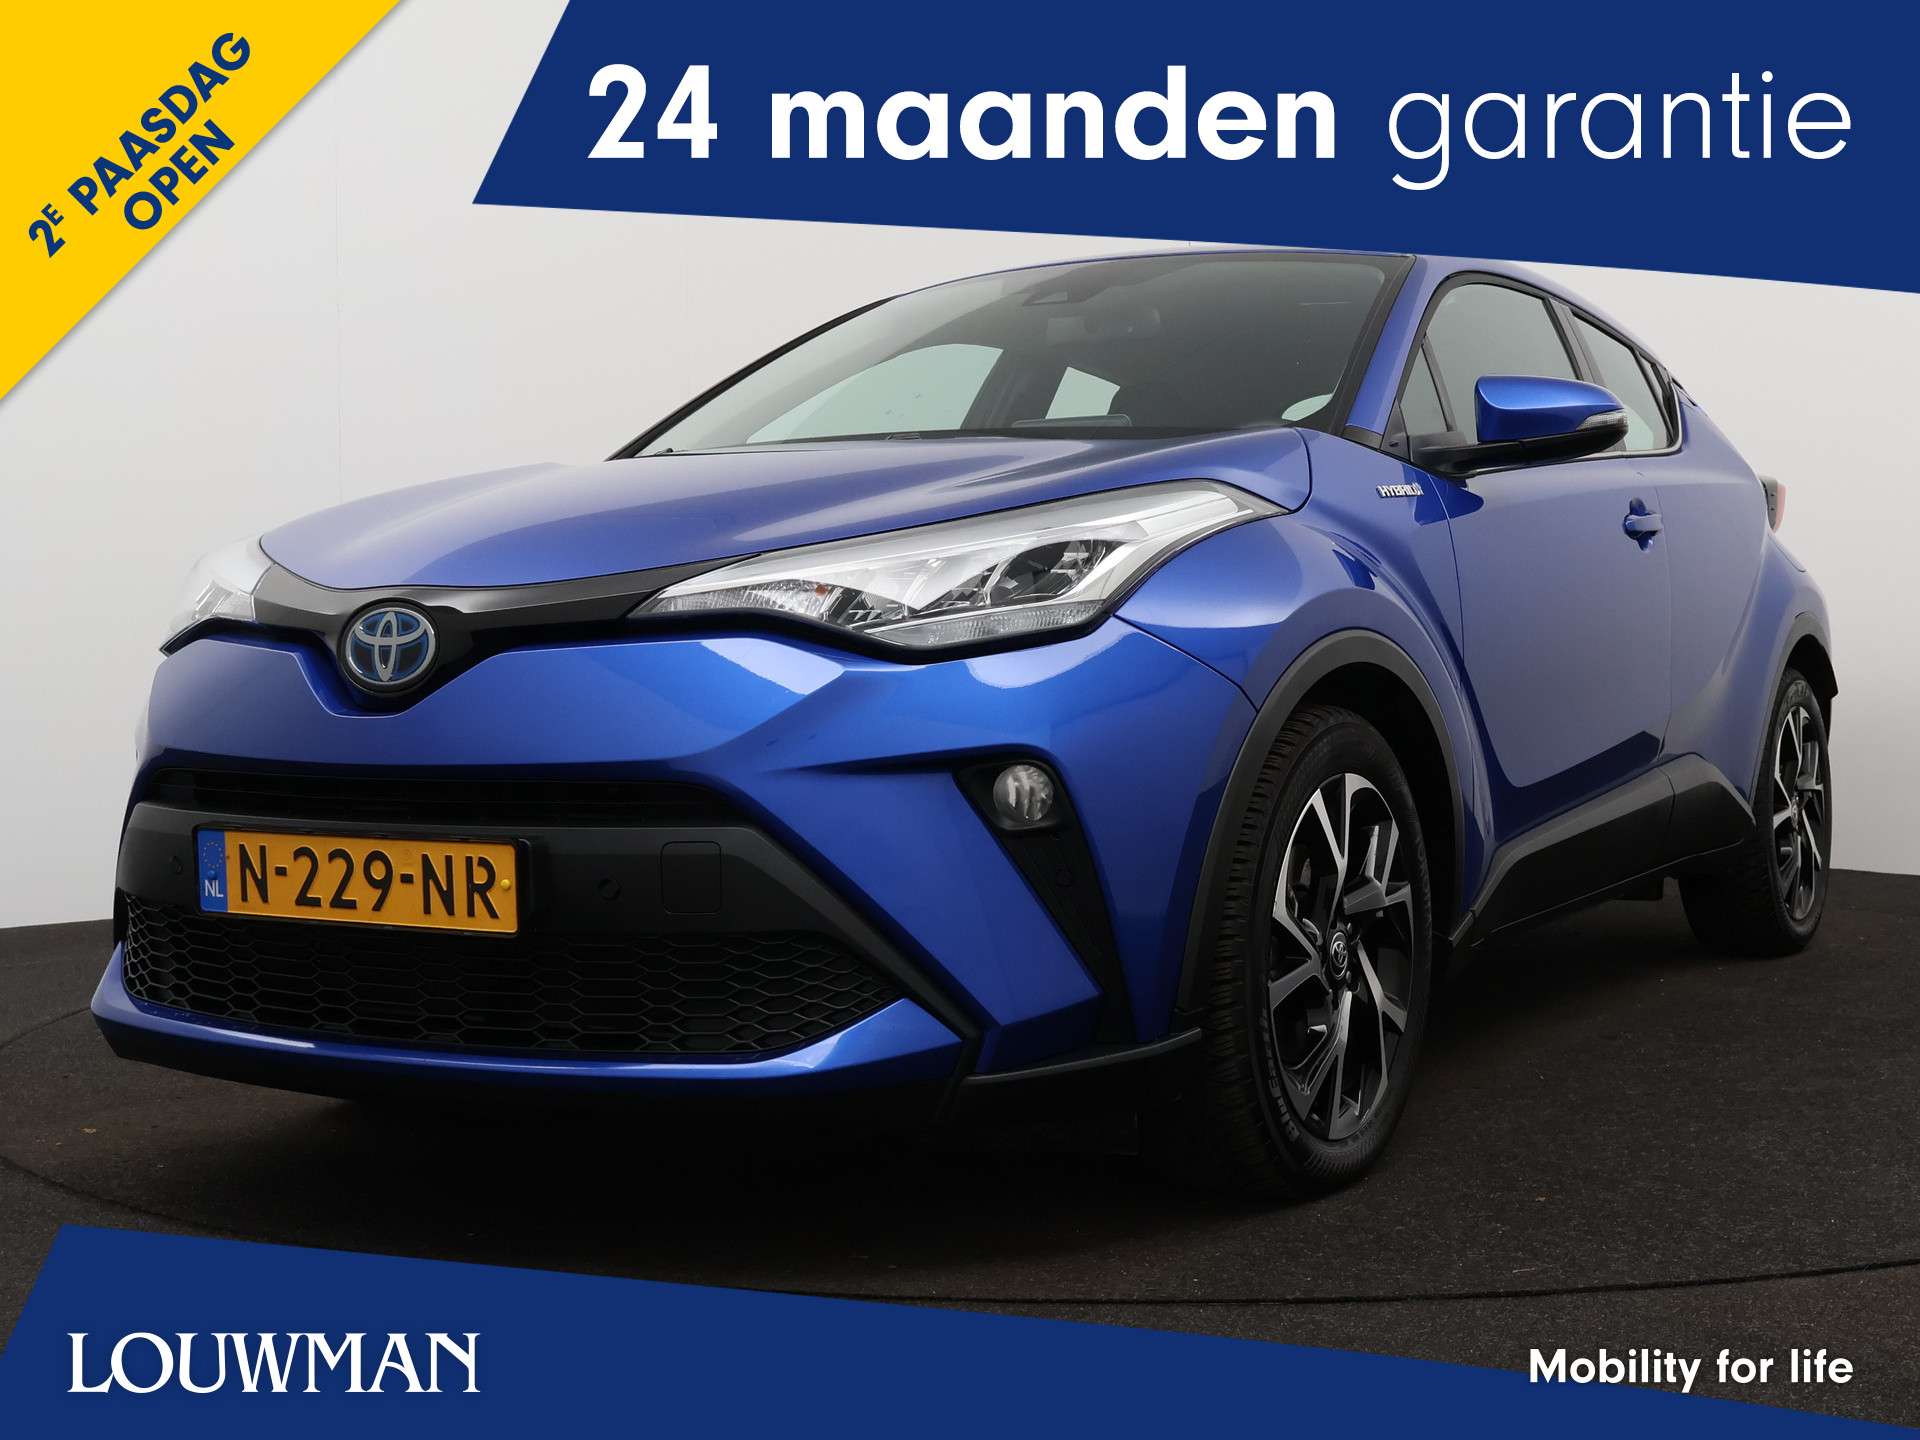 Toyota C-HR Off-Road/Pick-up in Blue used in `S-GRAVENHAGE for € 27,925.-